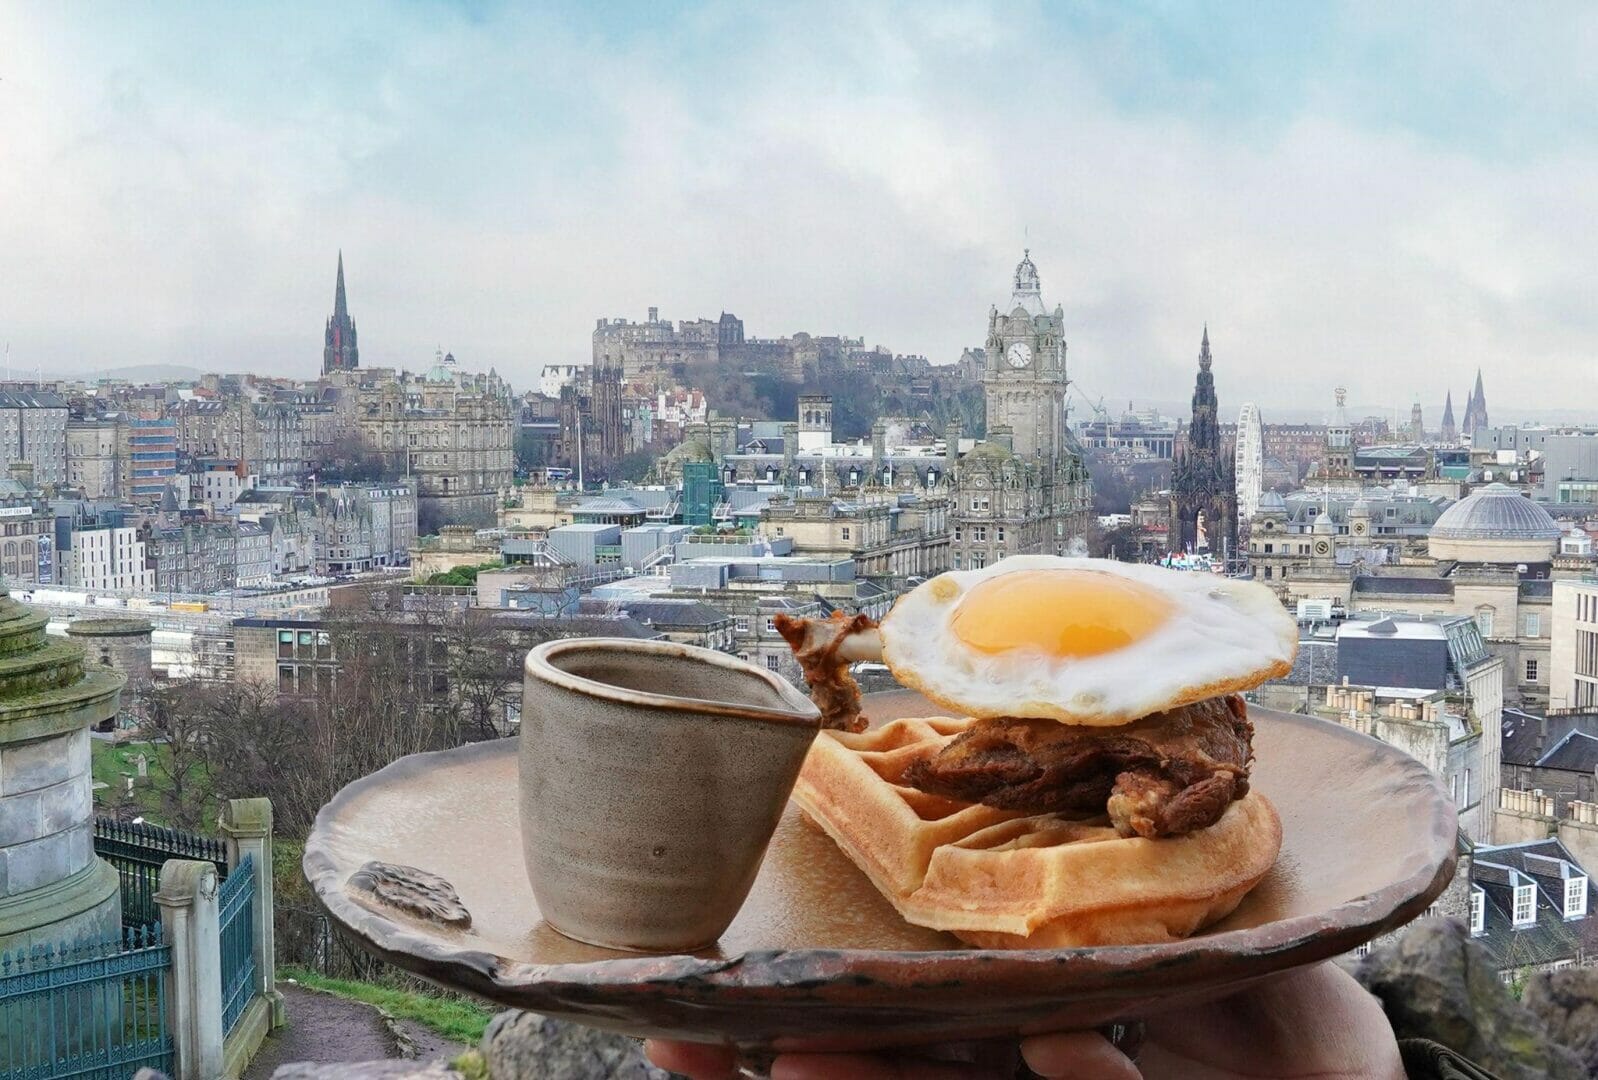 DUCK & WAFFLE LANDS IN EDINBURGH AND WILL OFFICIALLY OPEN ON 1st FEBRUARY 